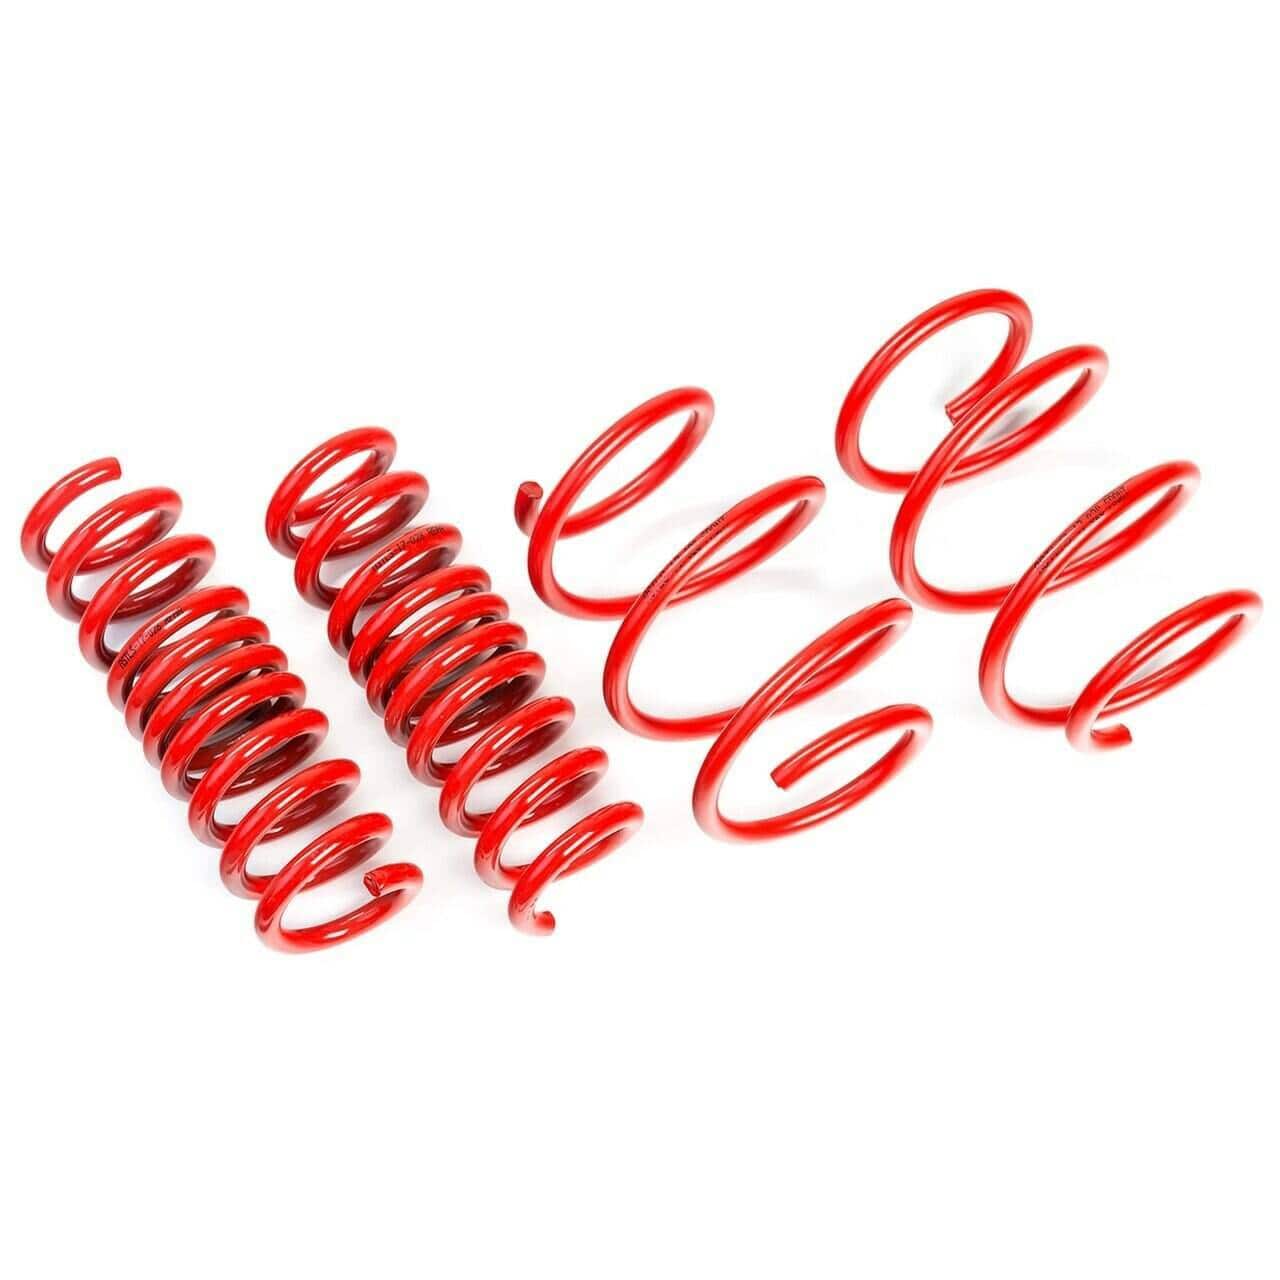 AST Suspension Lowering Springs (25MM/25MM) - 2016+ Audi A5 Quattro Coupe 2.0TFSi/2.0TDi (F53) ASTLS-19-007